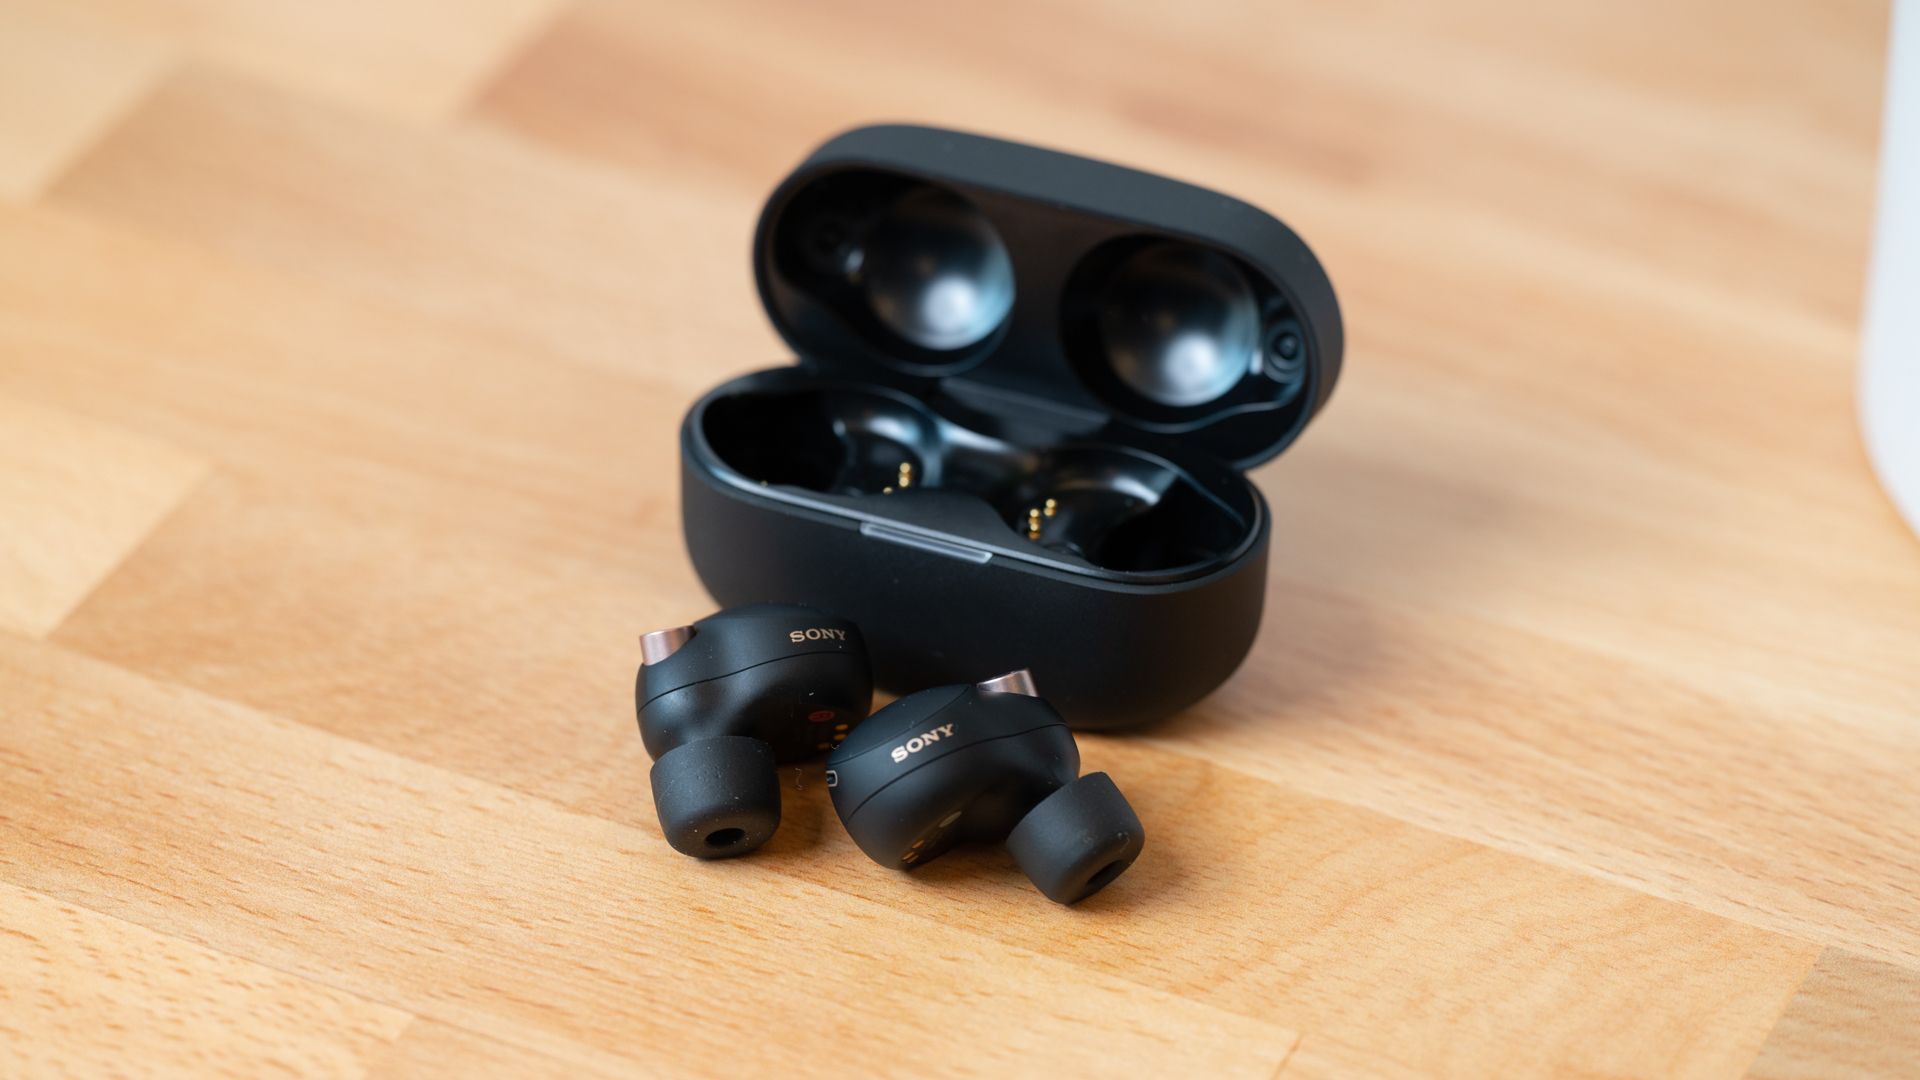 The Sony WF-1000XM4 earbuds and case on a wood table